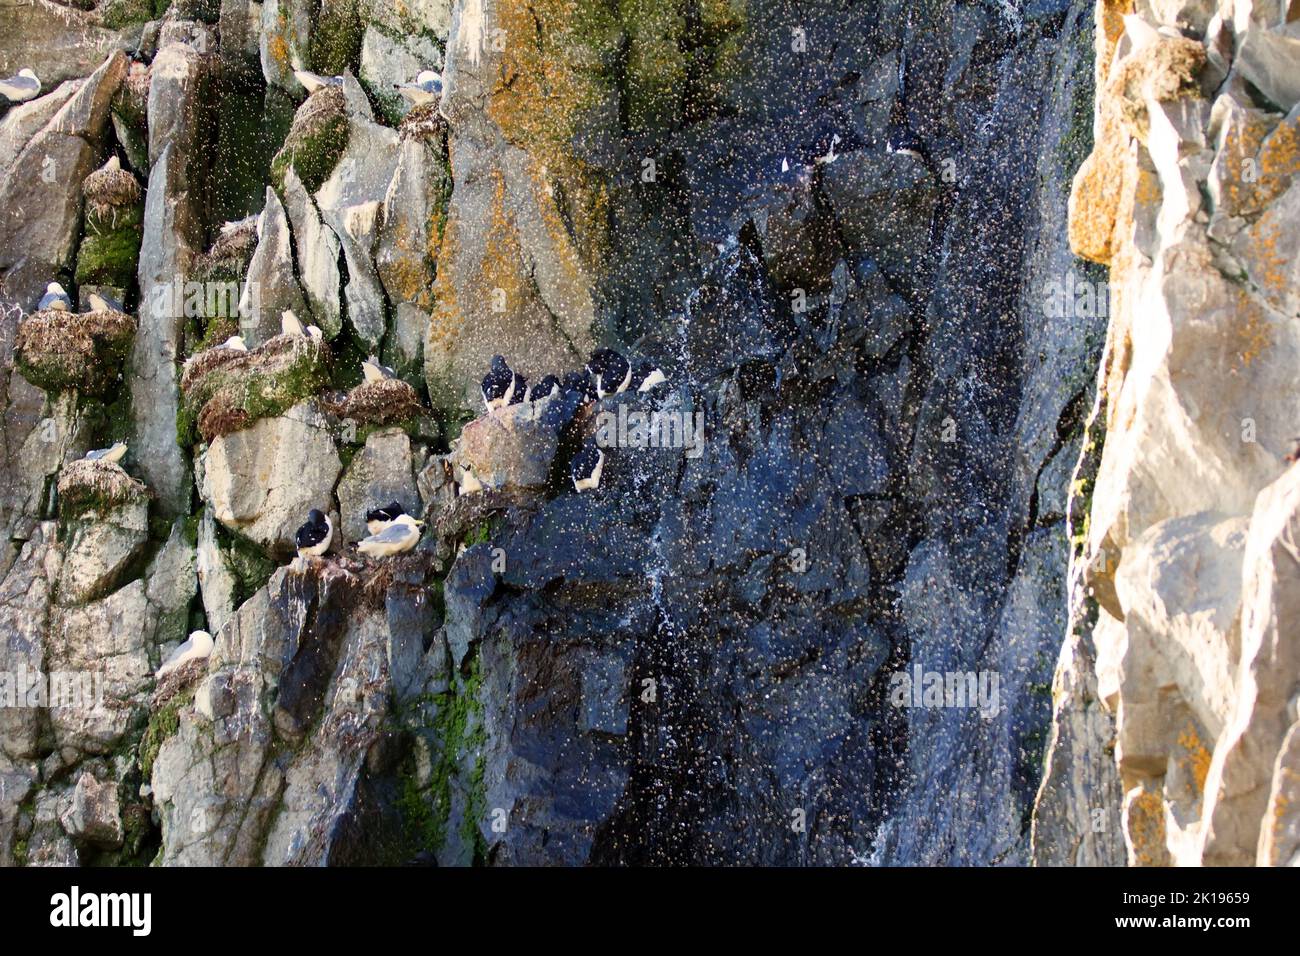 Water flows down the rocks, but an excess of moisture does not interfere with the nesting of seabirds (guillemots). FJL Stock Photo